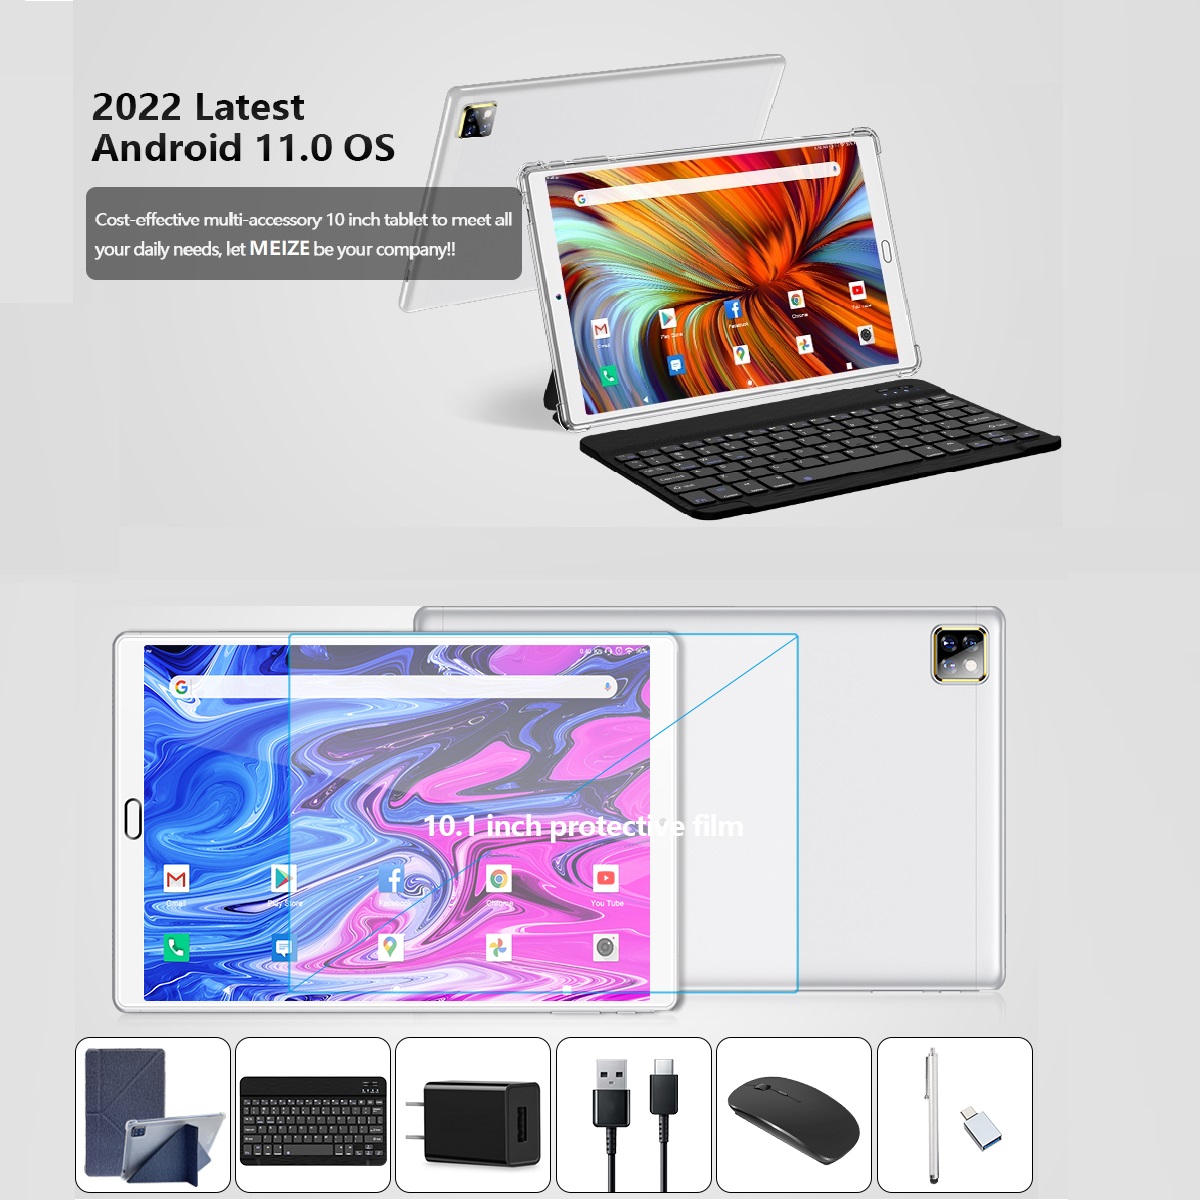 Tablet 10 inch Android Tablet Android 11.0 Tablet with Keyboard Wireless  Mouse Case Stylus,5G WiFi Tablet,4GB RAM 64GB ROM Storage,128GB Expandable,Quad  Core Processor,White Tablet,Back-to-school Gift